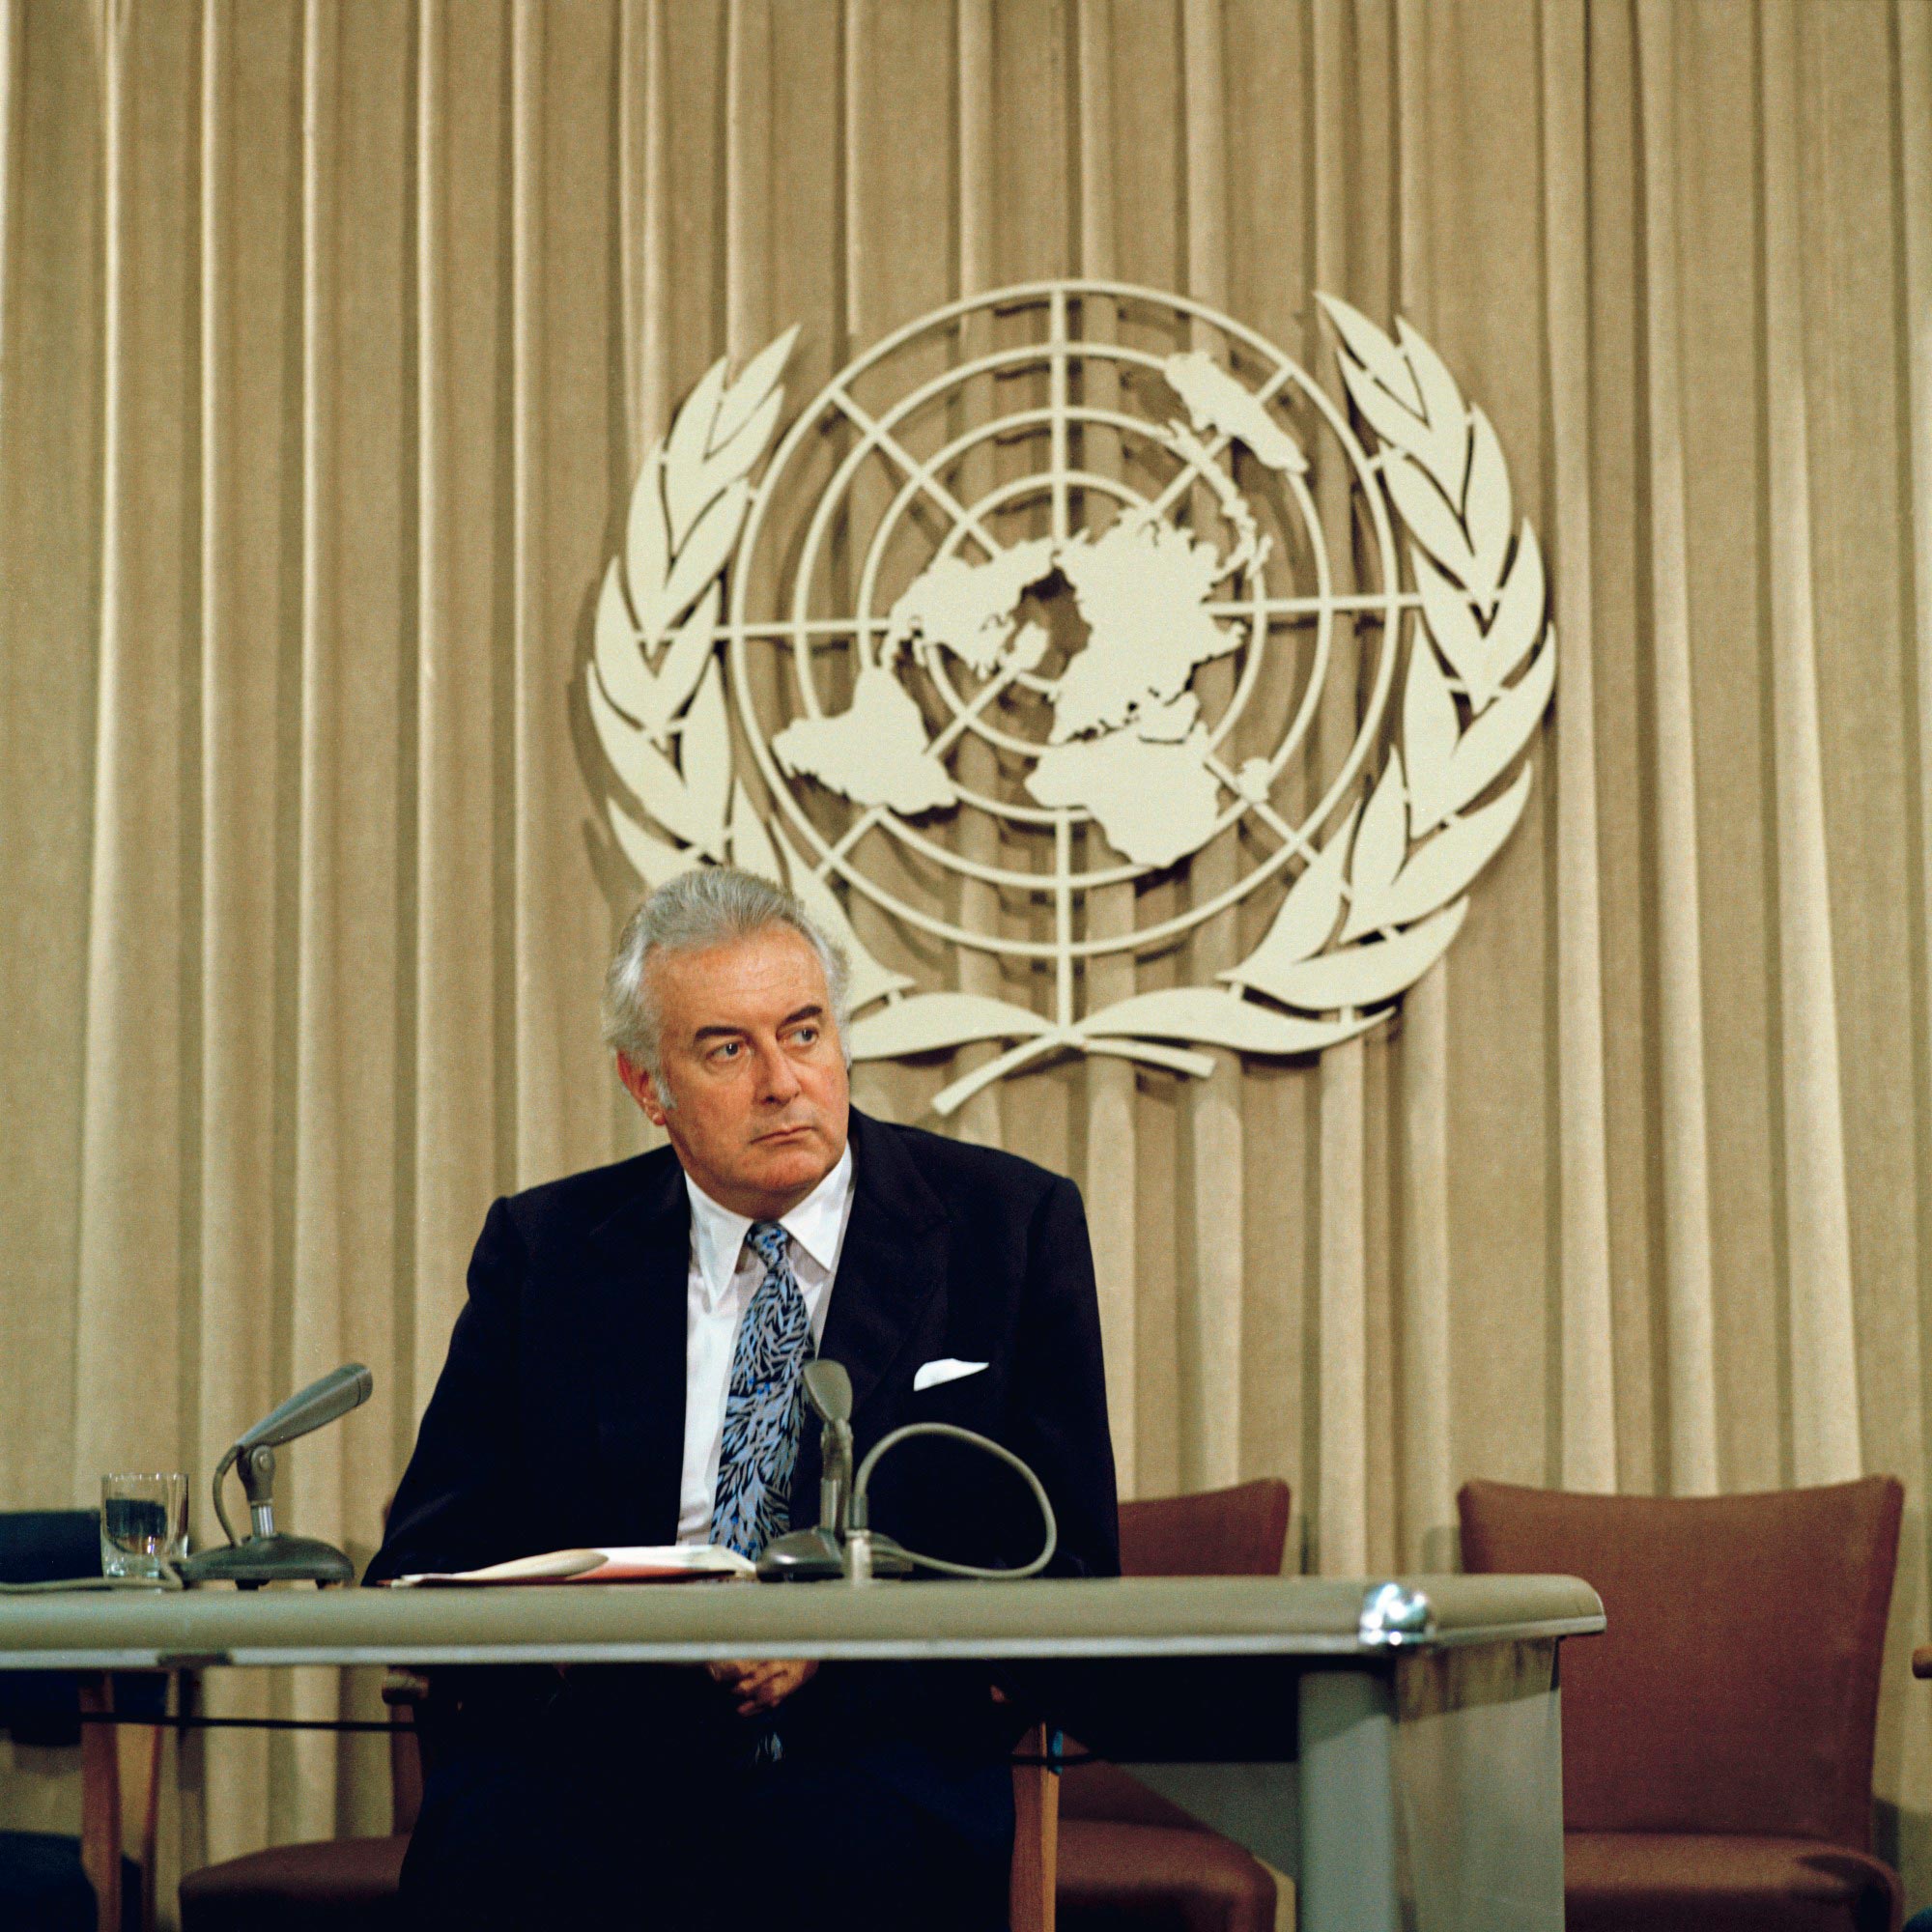 Gough Whitlam speaking at a United Nations convention during tour of the USA, 1974.